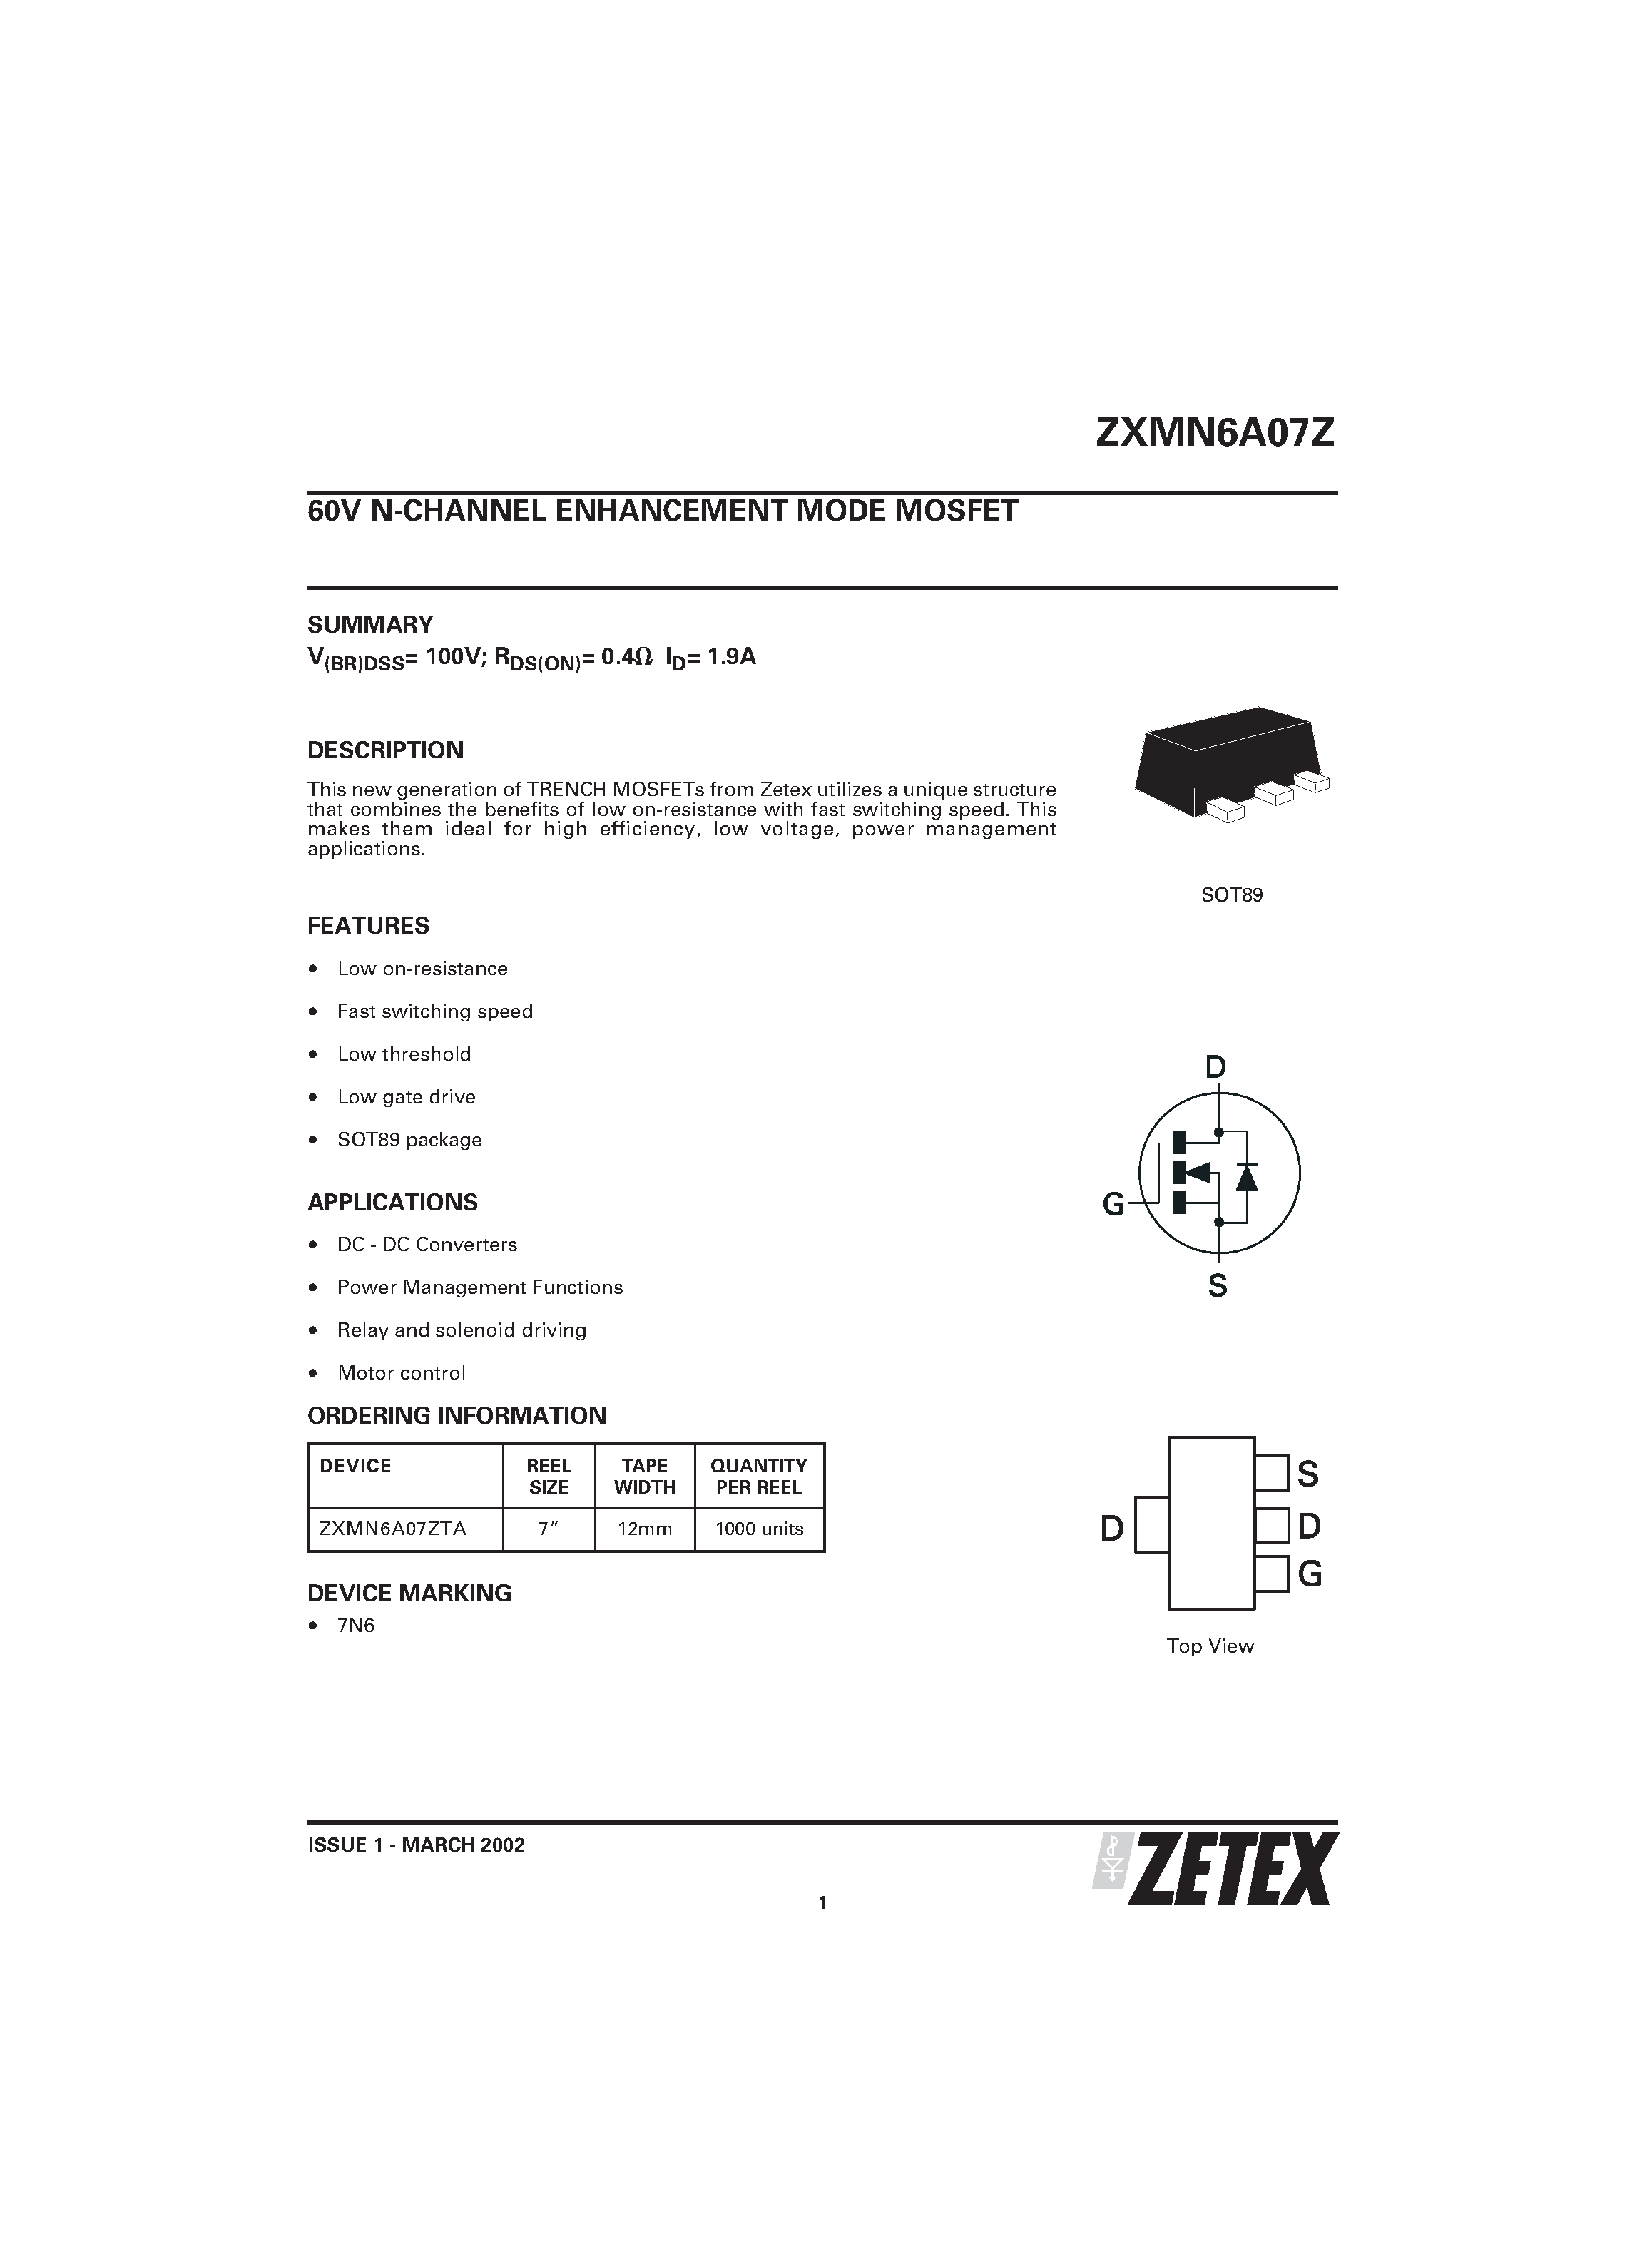 Datasheet ZXMN6A07Z - 60V N-CHANNEL ENHANCEMENT MODE MOSFET page 1